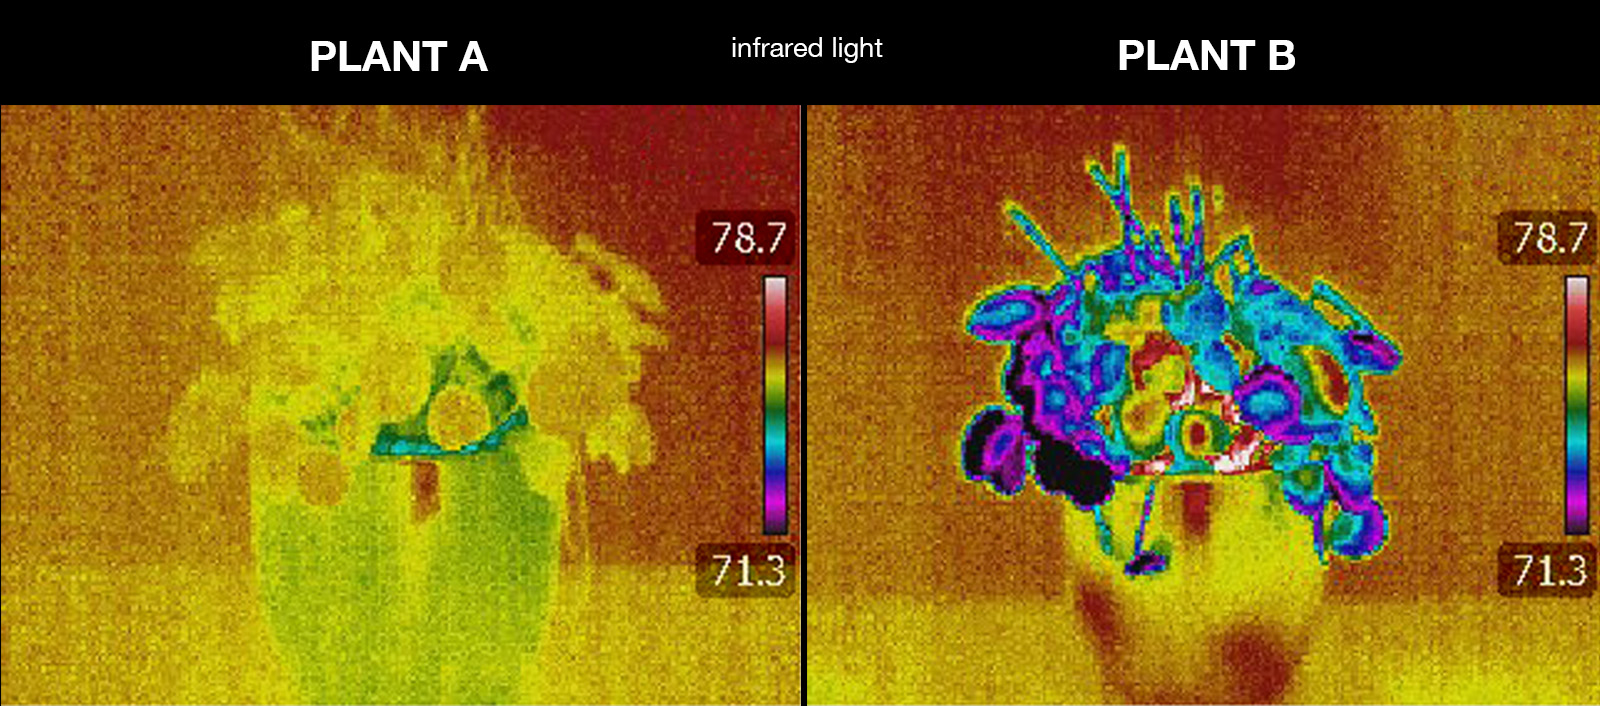 Colors representing temperature are show in infrared images of the houseplants. The temperature scale shown on the infrared view of each plant ranges from 78.7 degrees at the max to 71.3 degrees at the min (represented by a color scale going from white to red to yellow to green to blue to purple to black, respectively). The temperatures on Plant A, which are mostly yellow and orange, are much warmer than those on Plant B, which is a mix of blue, purple, and black on the leaves closest to the base of the pot.